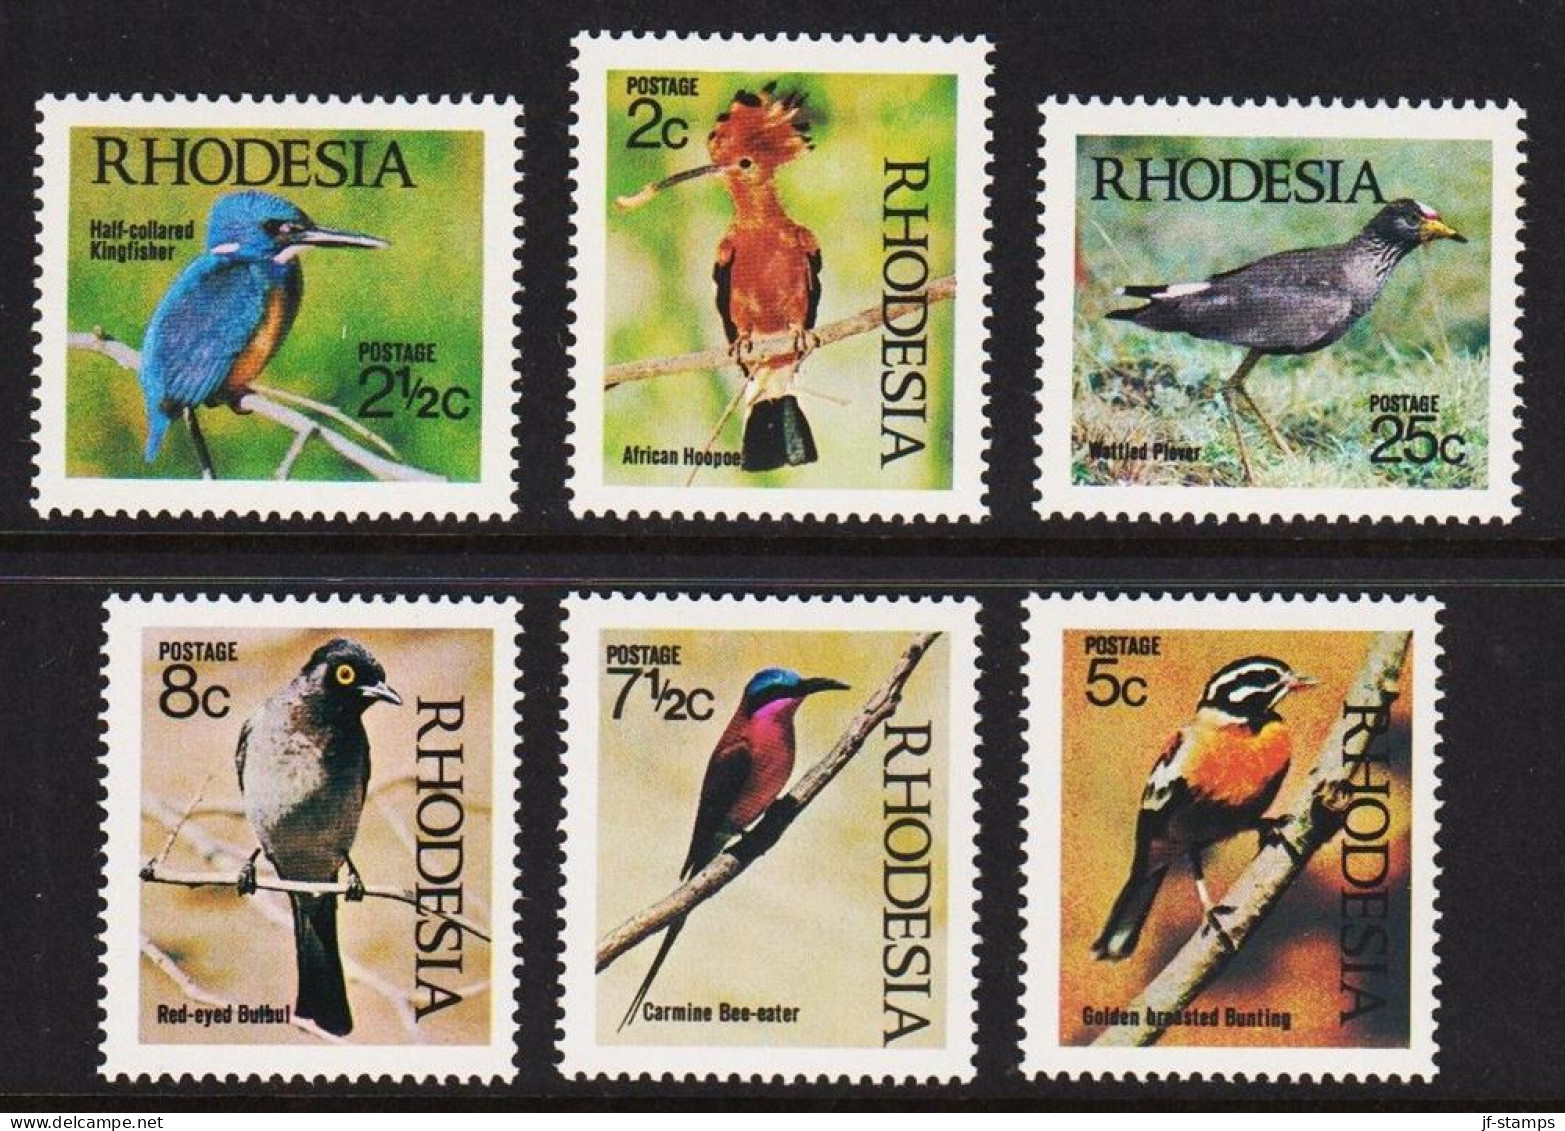 1971. RHODESIA. Birds Of Rhodesia. Complete Set With 6 Stamps Never Hinged. (Michel 108-113) - JF545305 - Rhodesia (1964-1980)